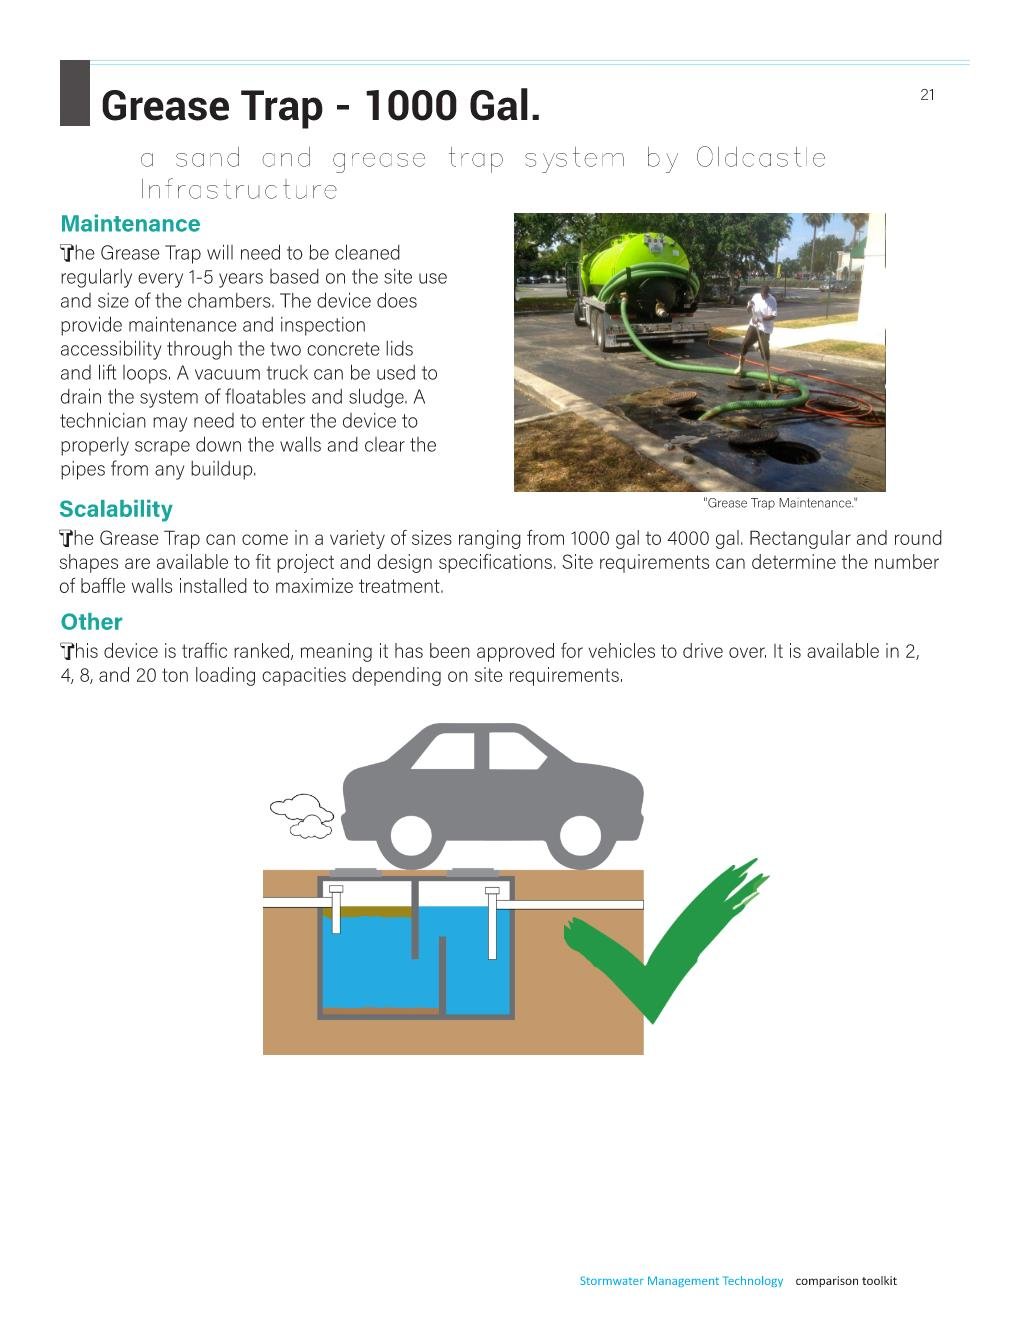 Stormwater Management Technology Comparison Toolkit Page 021.jpg